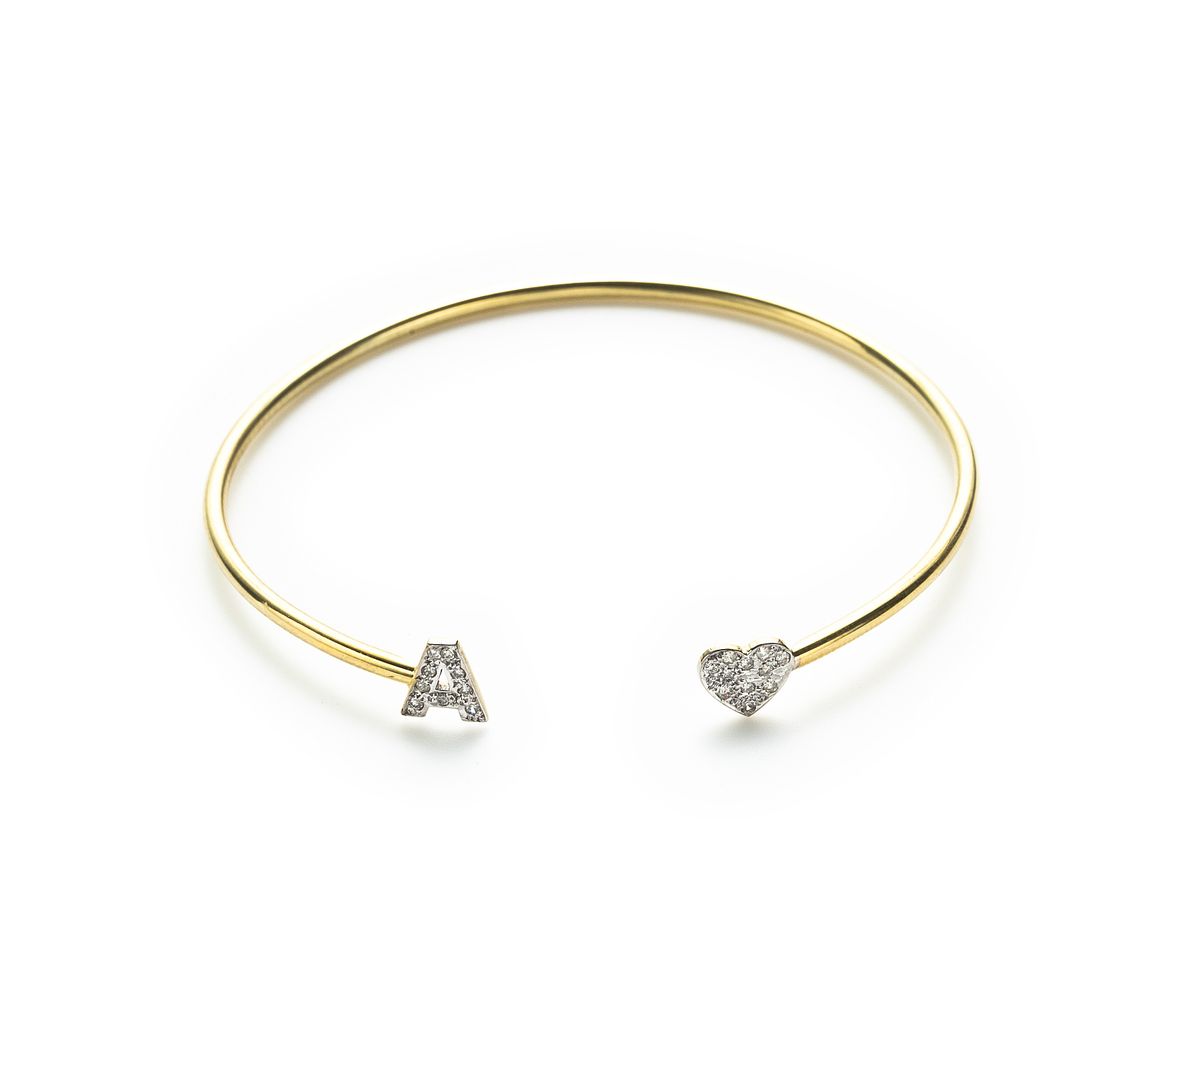 Personalized Jewelry gifts: Custom letter and heart bangle 